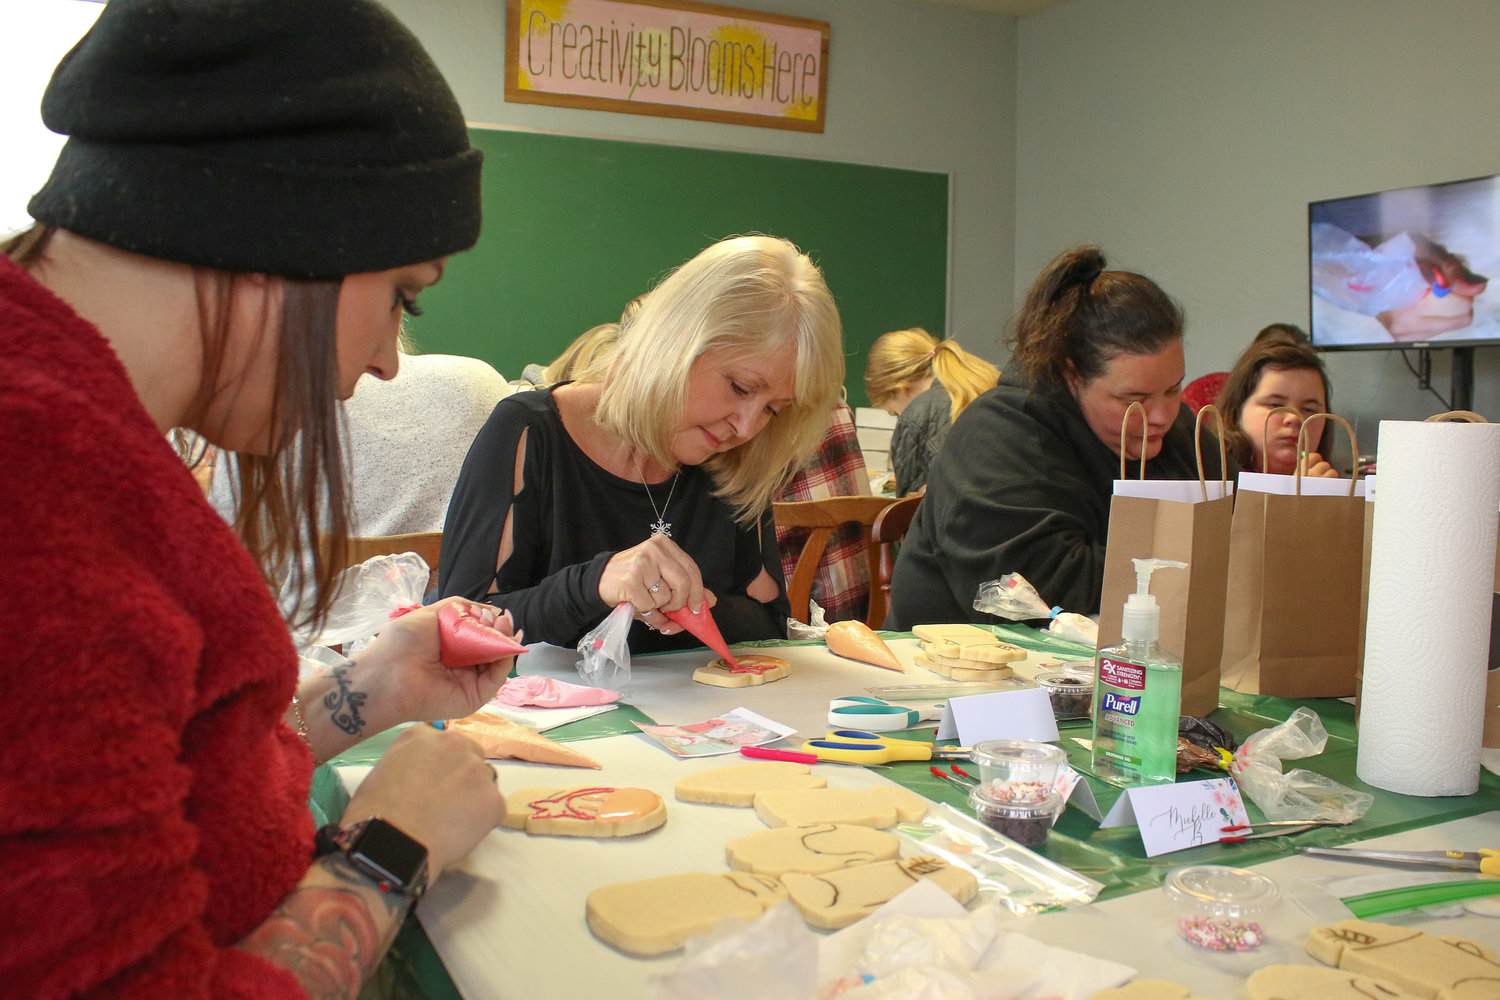 Attendees try their hands at royal icing decorating on sugar cookies during a class taught by Anna Martin at the Dandelion Creative Space on Sunday morning in Chehalis.